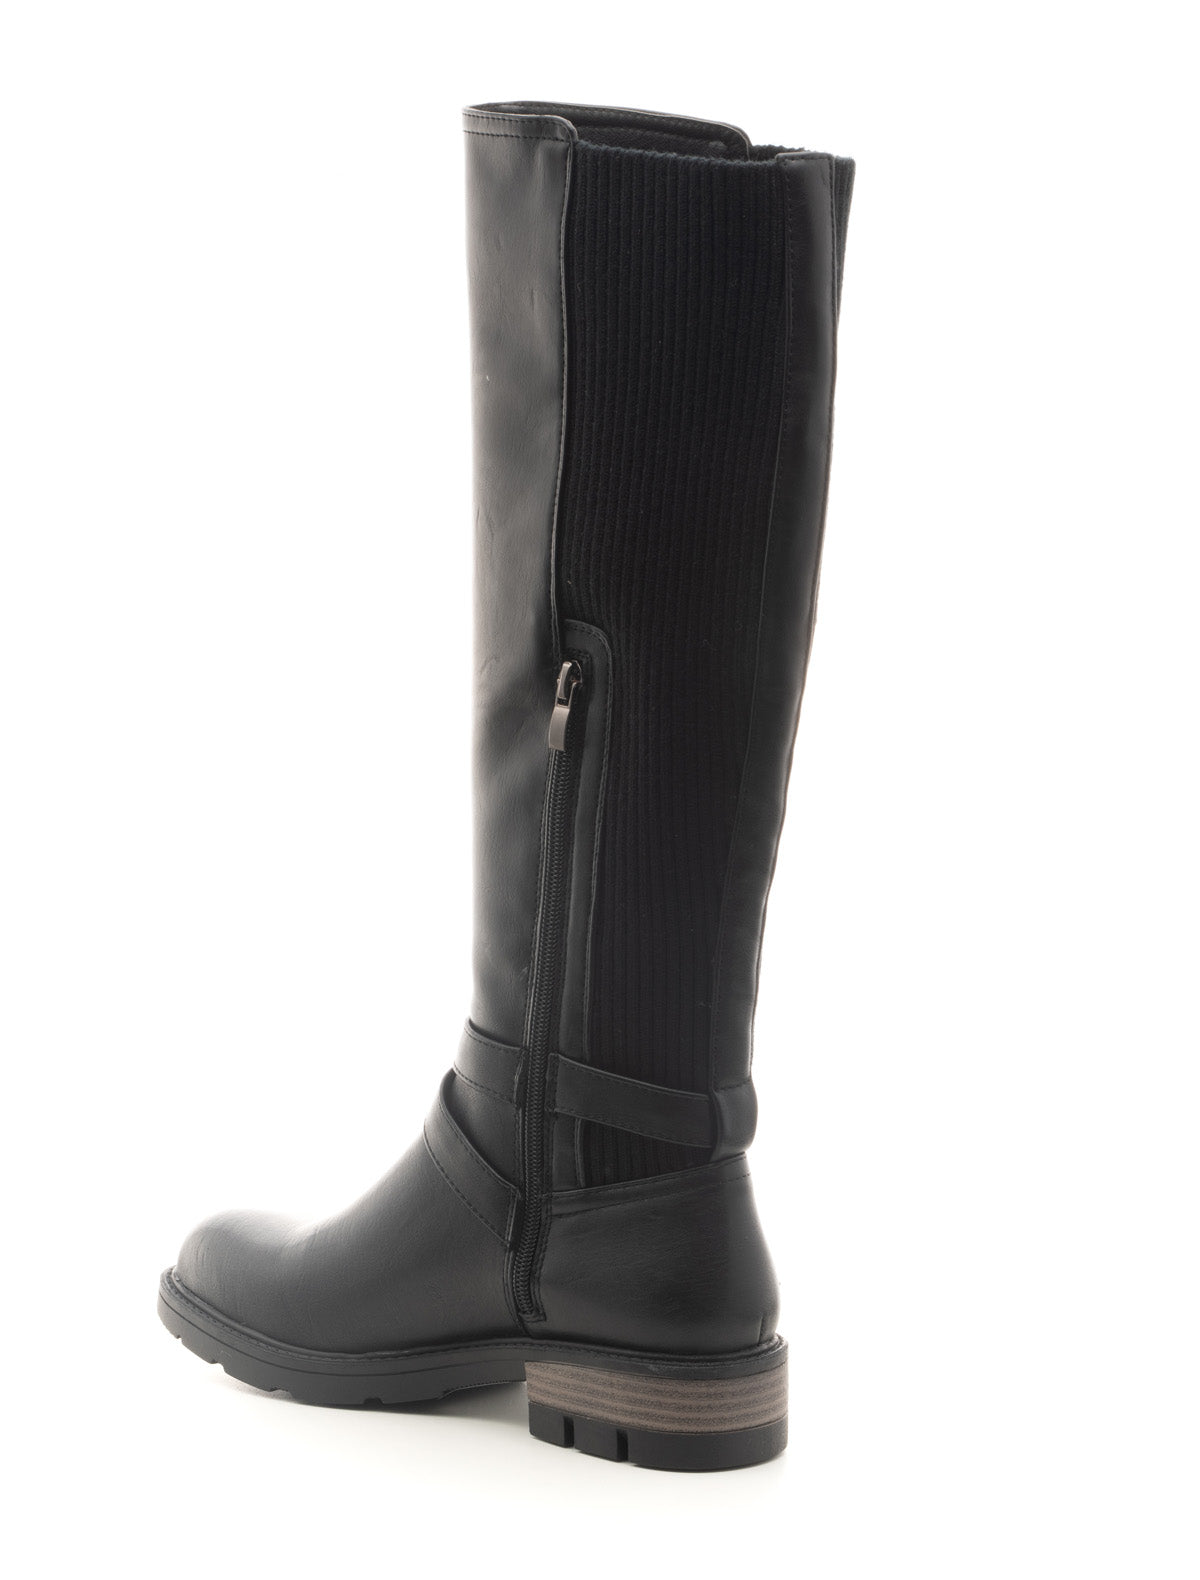 Corkys "Hayride" Tall Boots in Black Final Sale